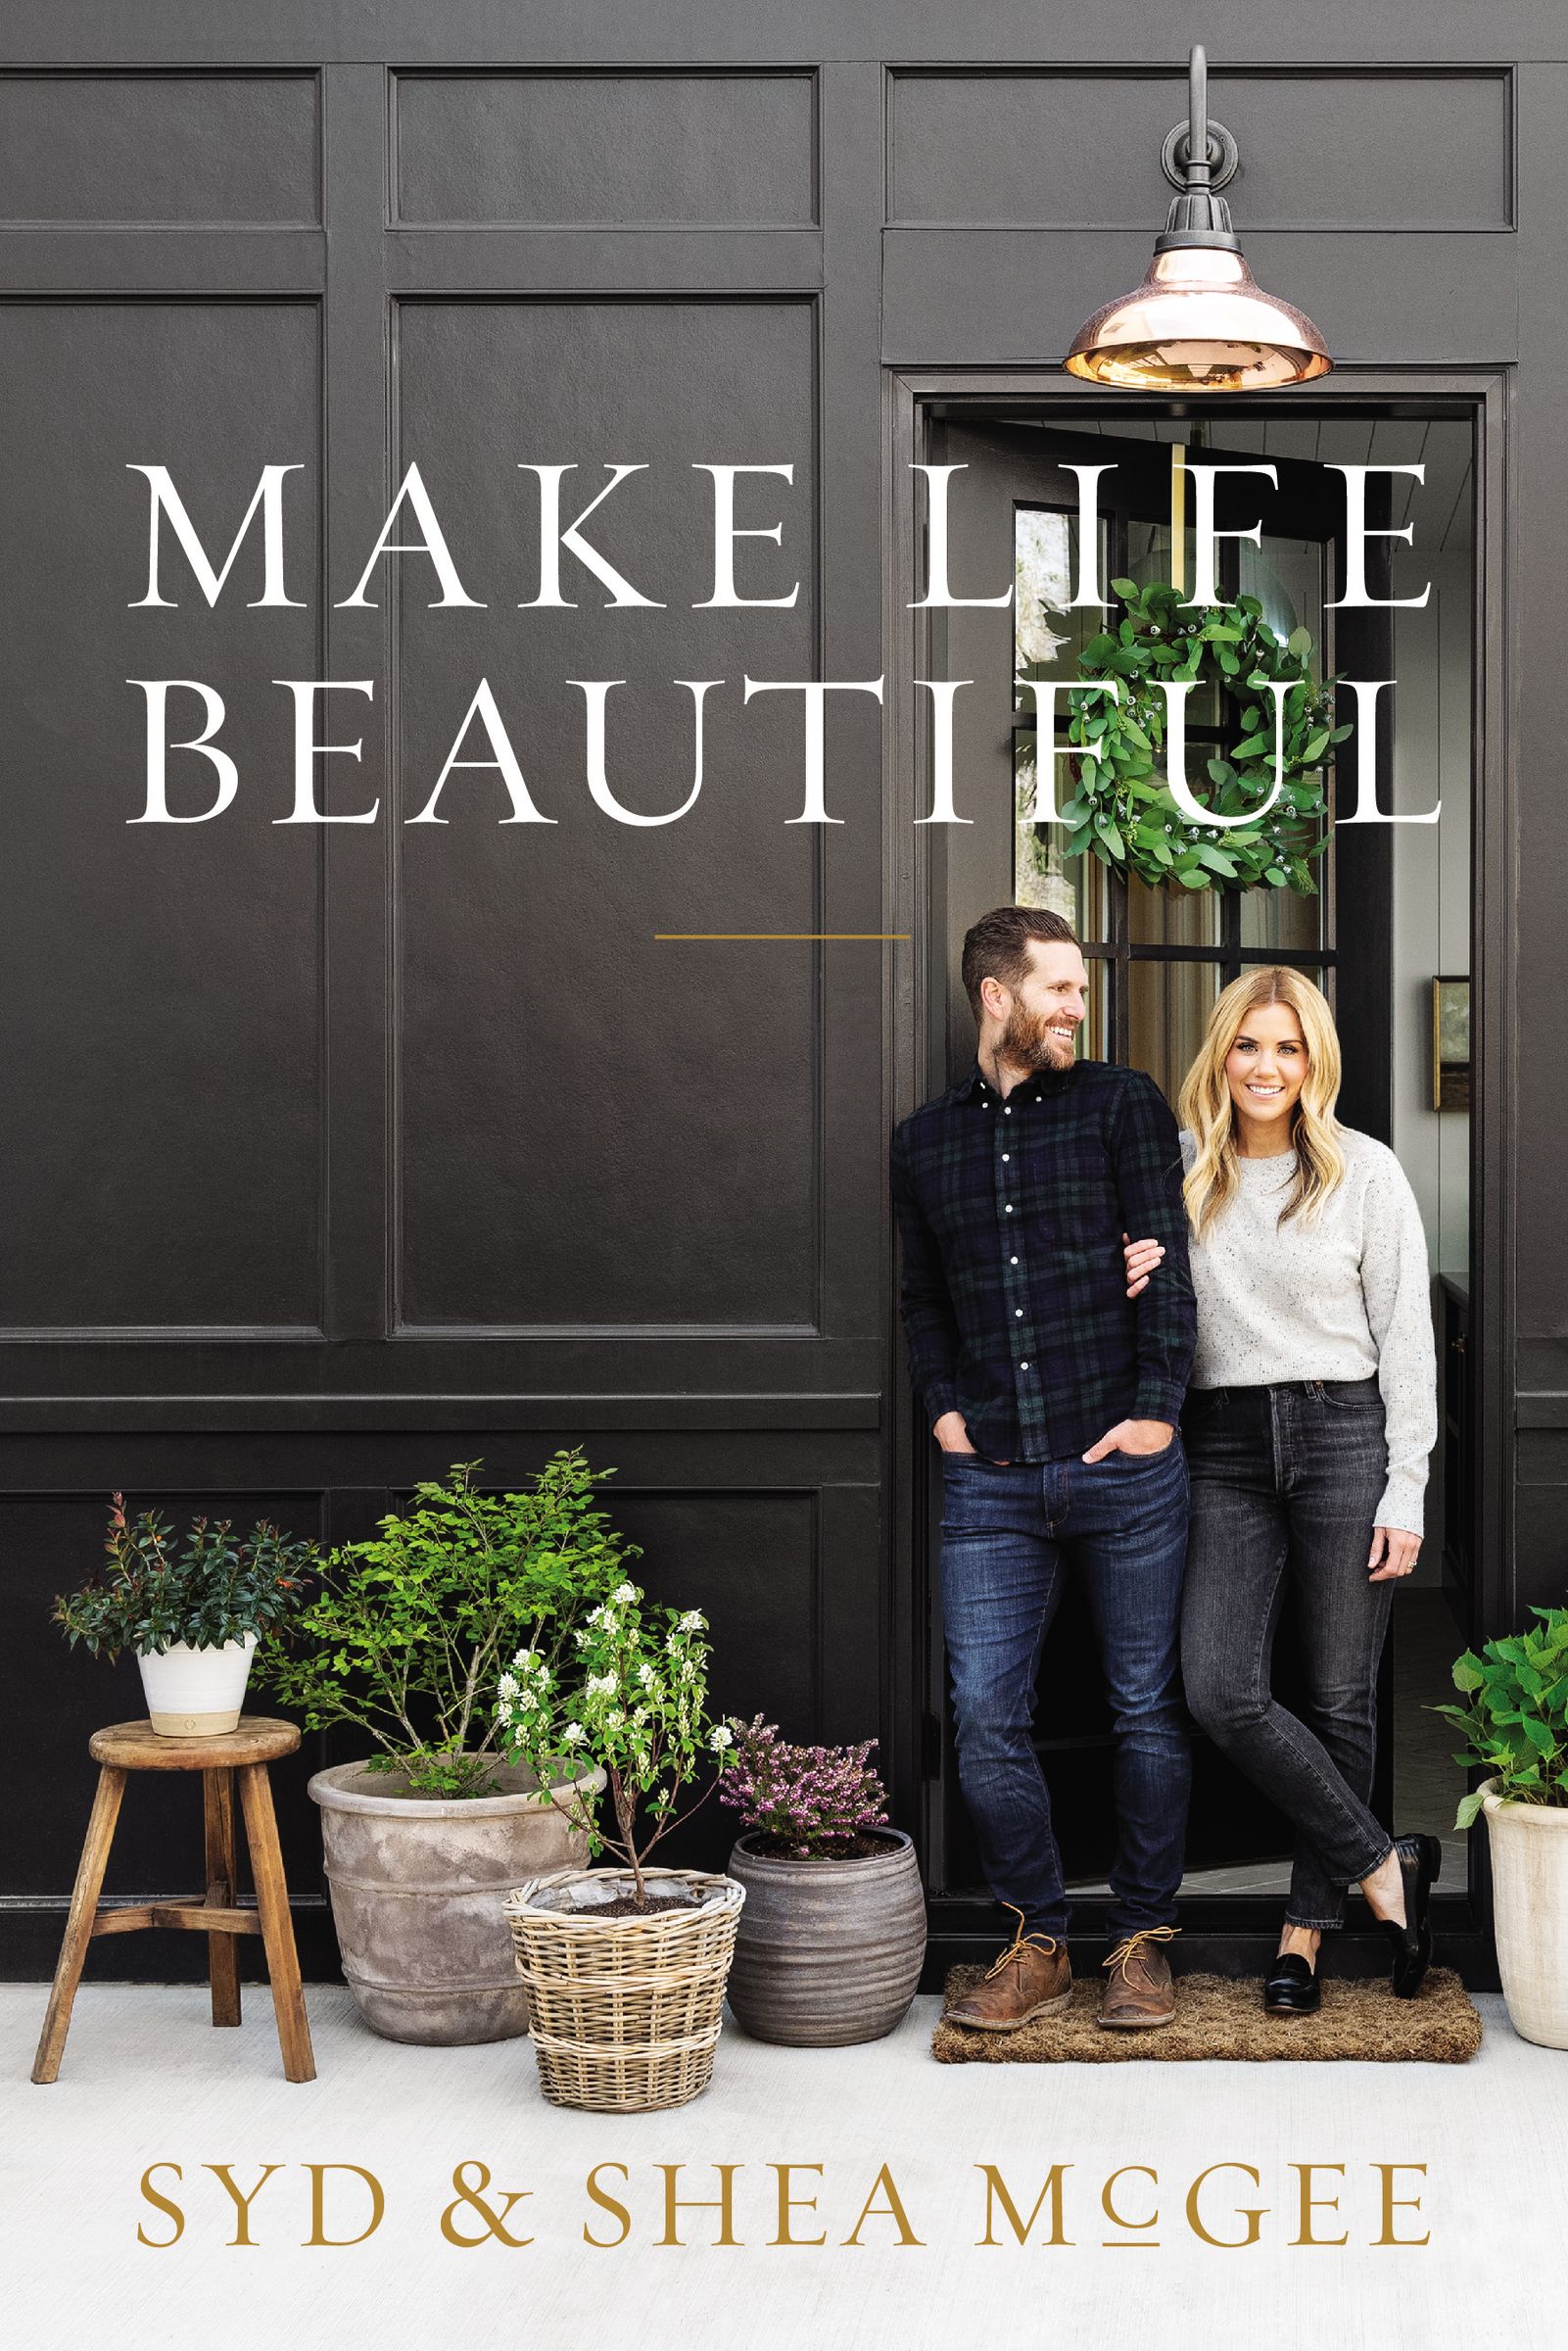 Make Life Beautiful By Syd McGee